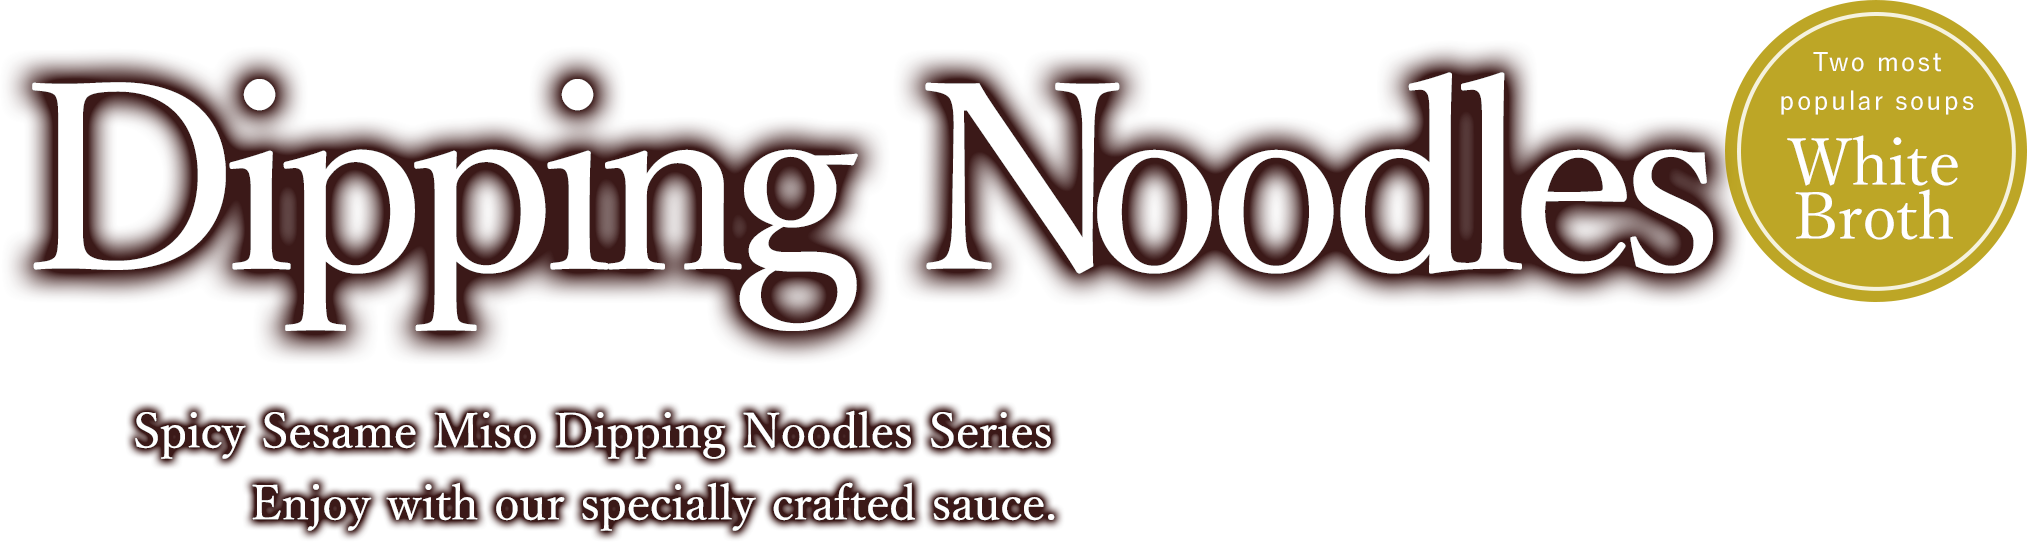 Sesame Miso Dipping Noodles Spicy Sesame Miso Dipping Noodles Series
Enjoy with our specially crafted sauce.